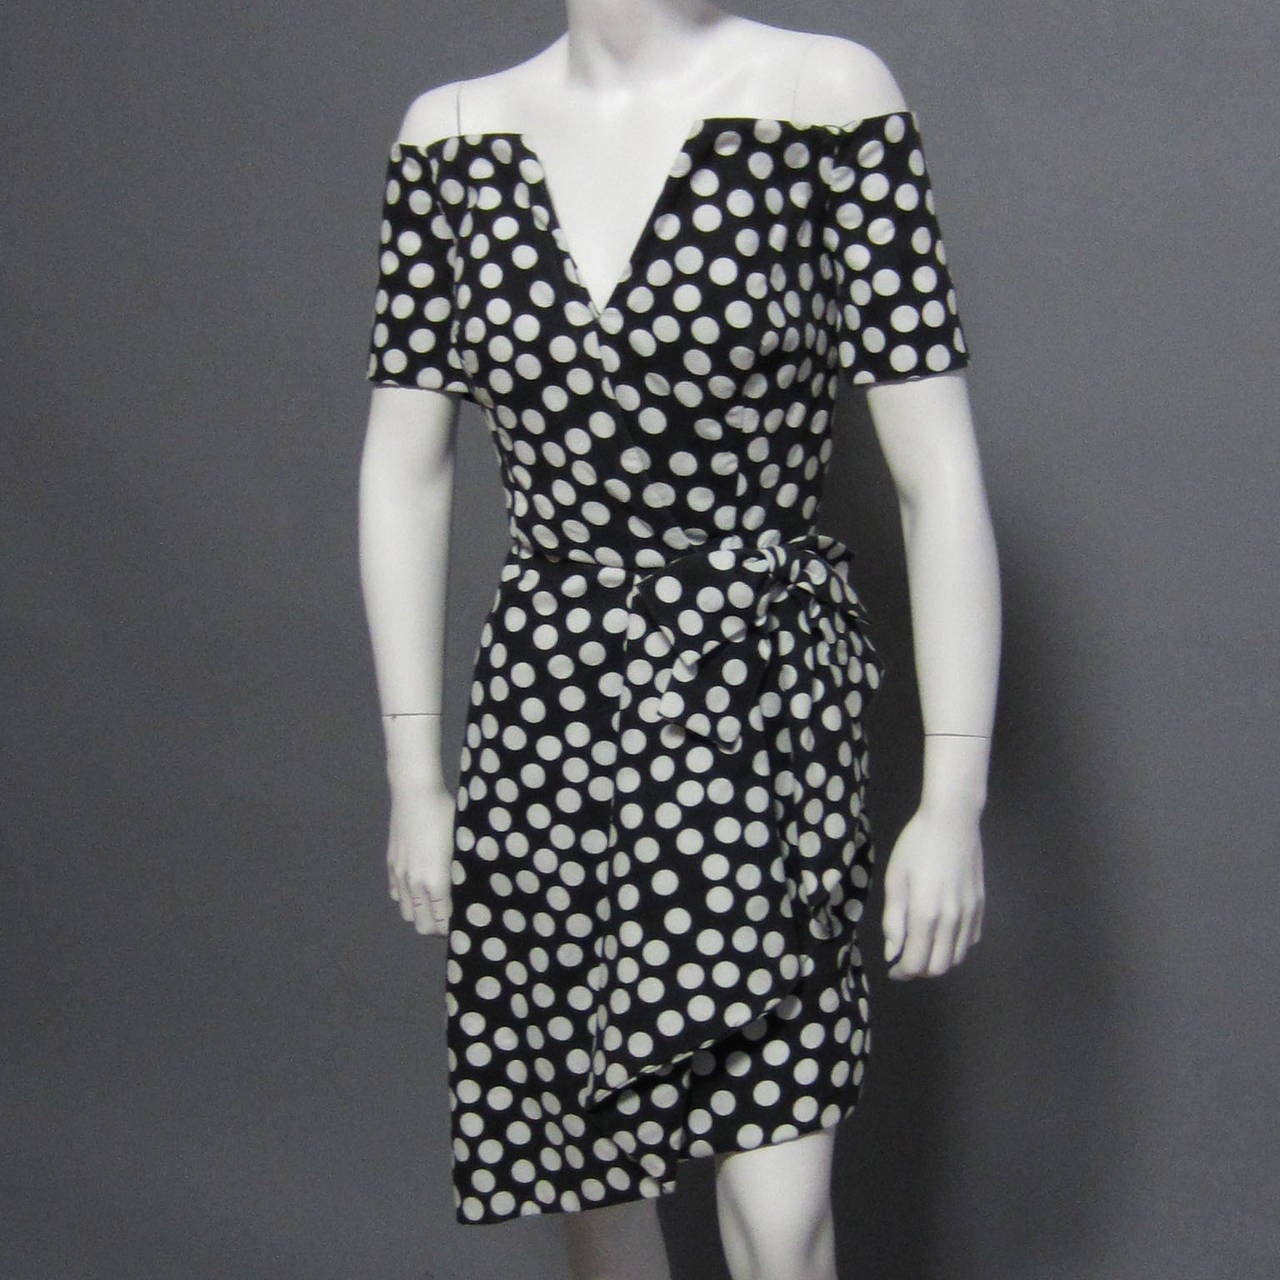 This Victor Costa party dress has everything. First of all, the classic white and black polka dot print is classic and will never go out of fashion. The piqué fabric is perfect for warm weather, but yet is stiff enough to create the strong design